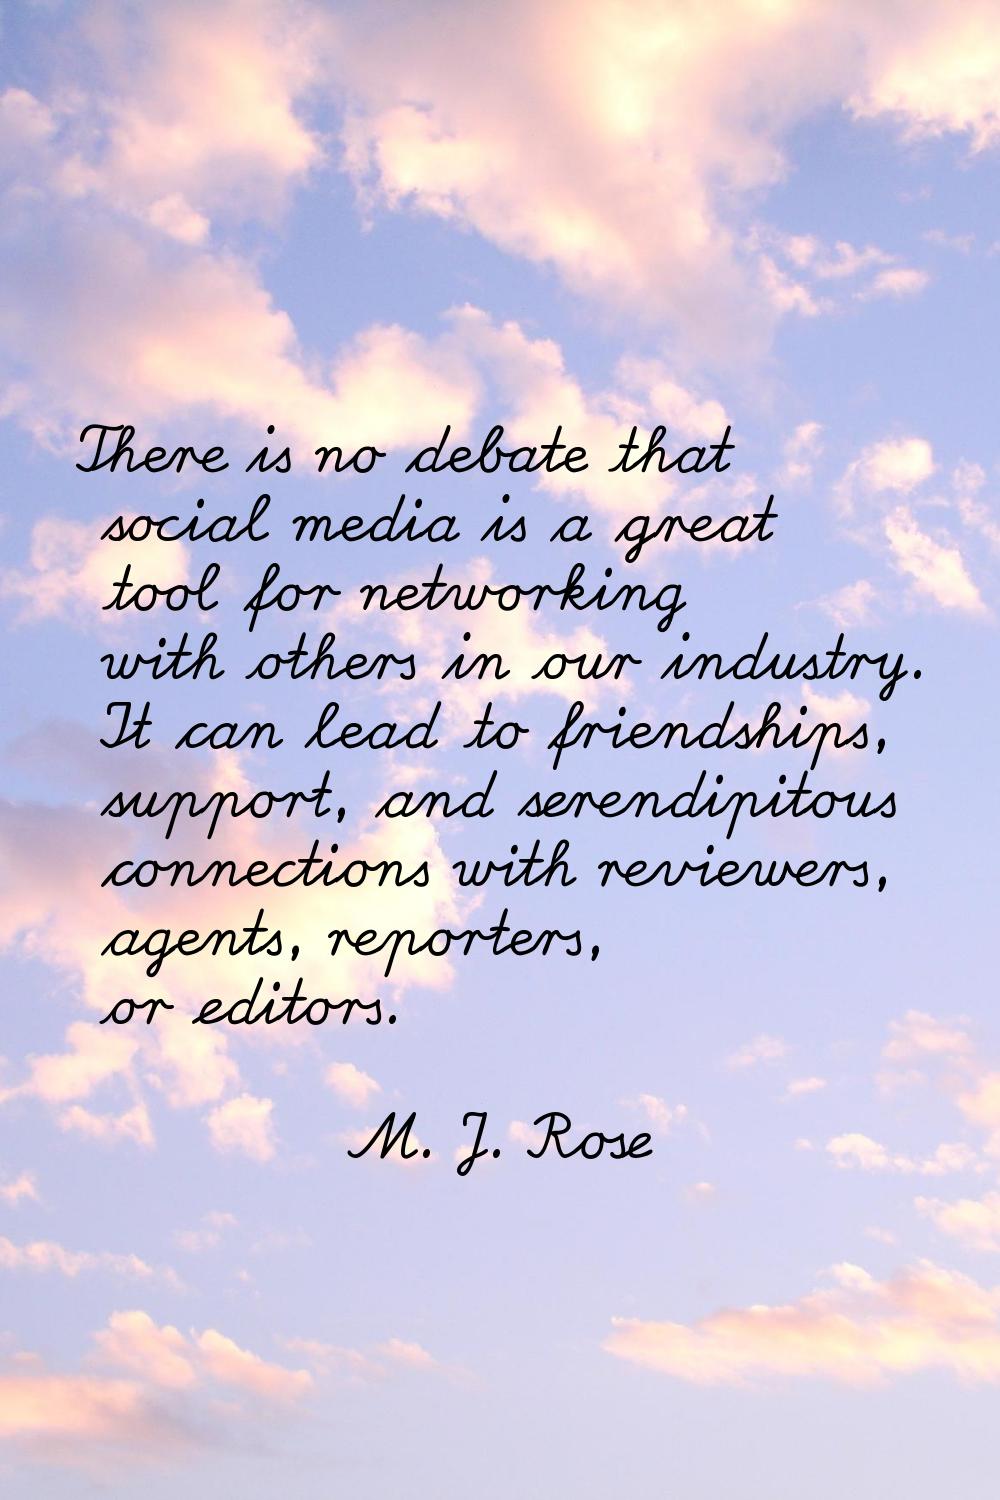 There is no debate that social media is a great tool for networking with others in our industry. It